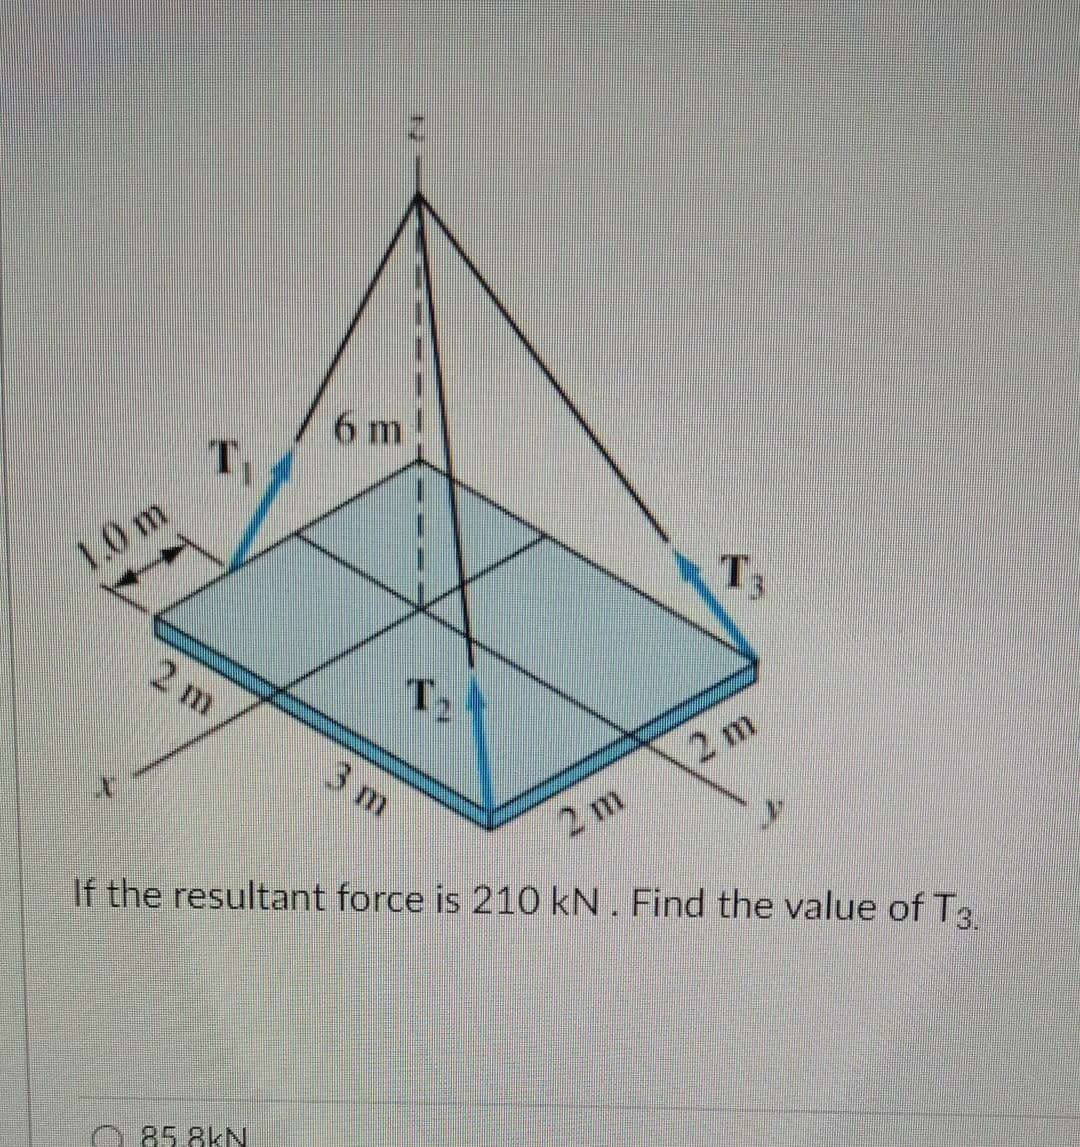 6 m!
1.0 m
T,
2 m
T2
3 m
2 m
2 m
If the resultant force is 210 kN. Find the value of T3
85.8kN
